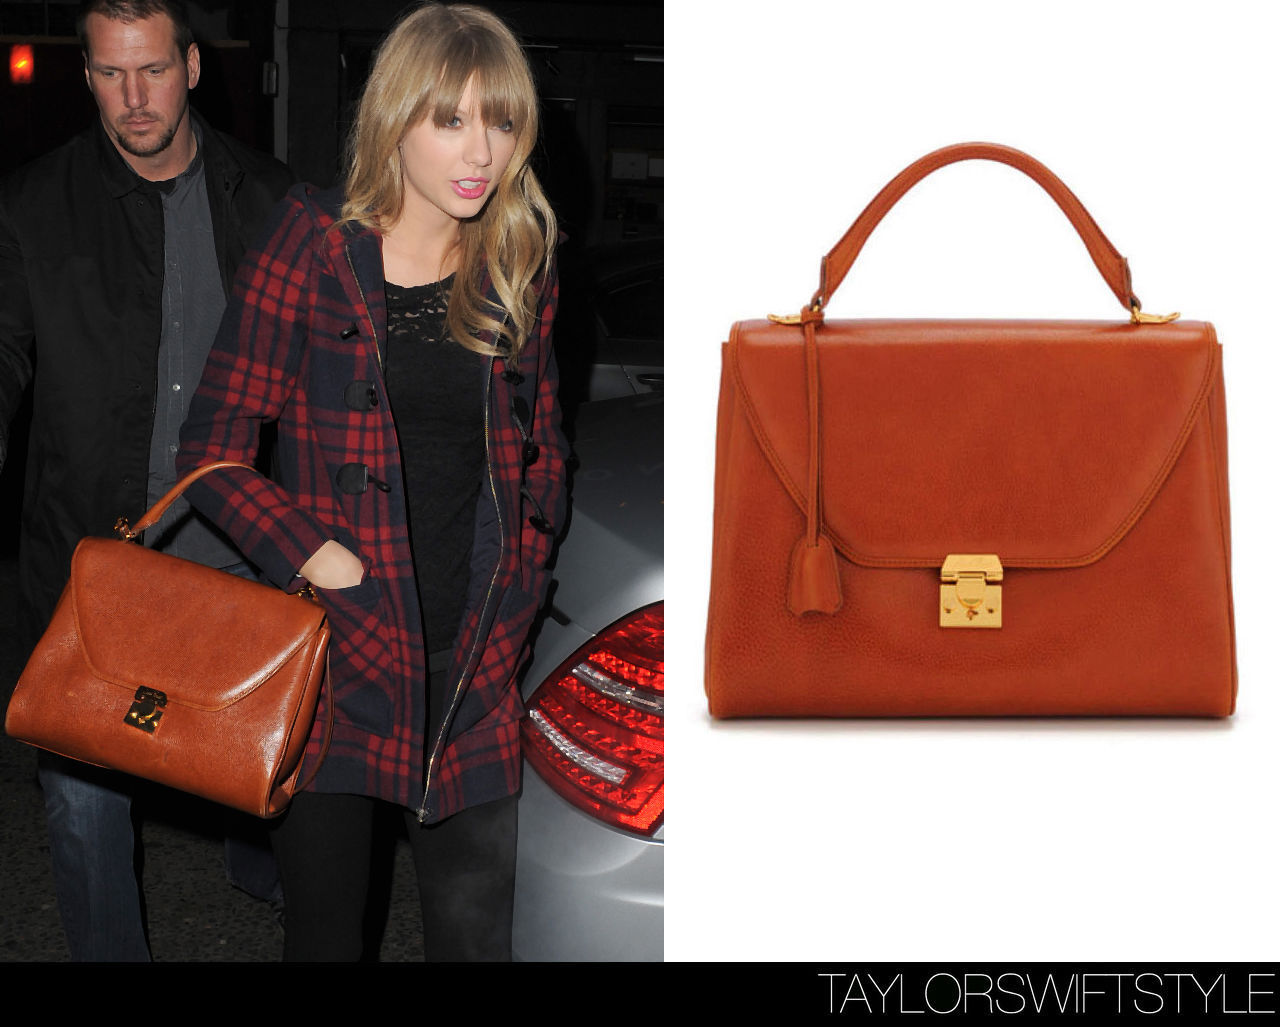 Arriving at Groucho Club | London, England | February 21, 2013Mark Cross ‘Scottie Large Flap Satchel’ - $2350.00Worn with: Dolce Vita coatView the numerous times Taylor has sported her Mark Cross satchel here.